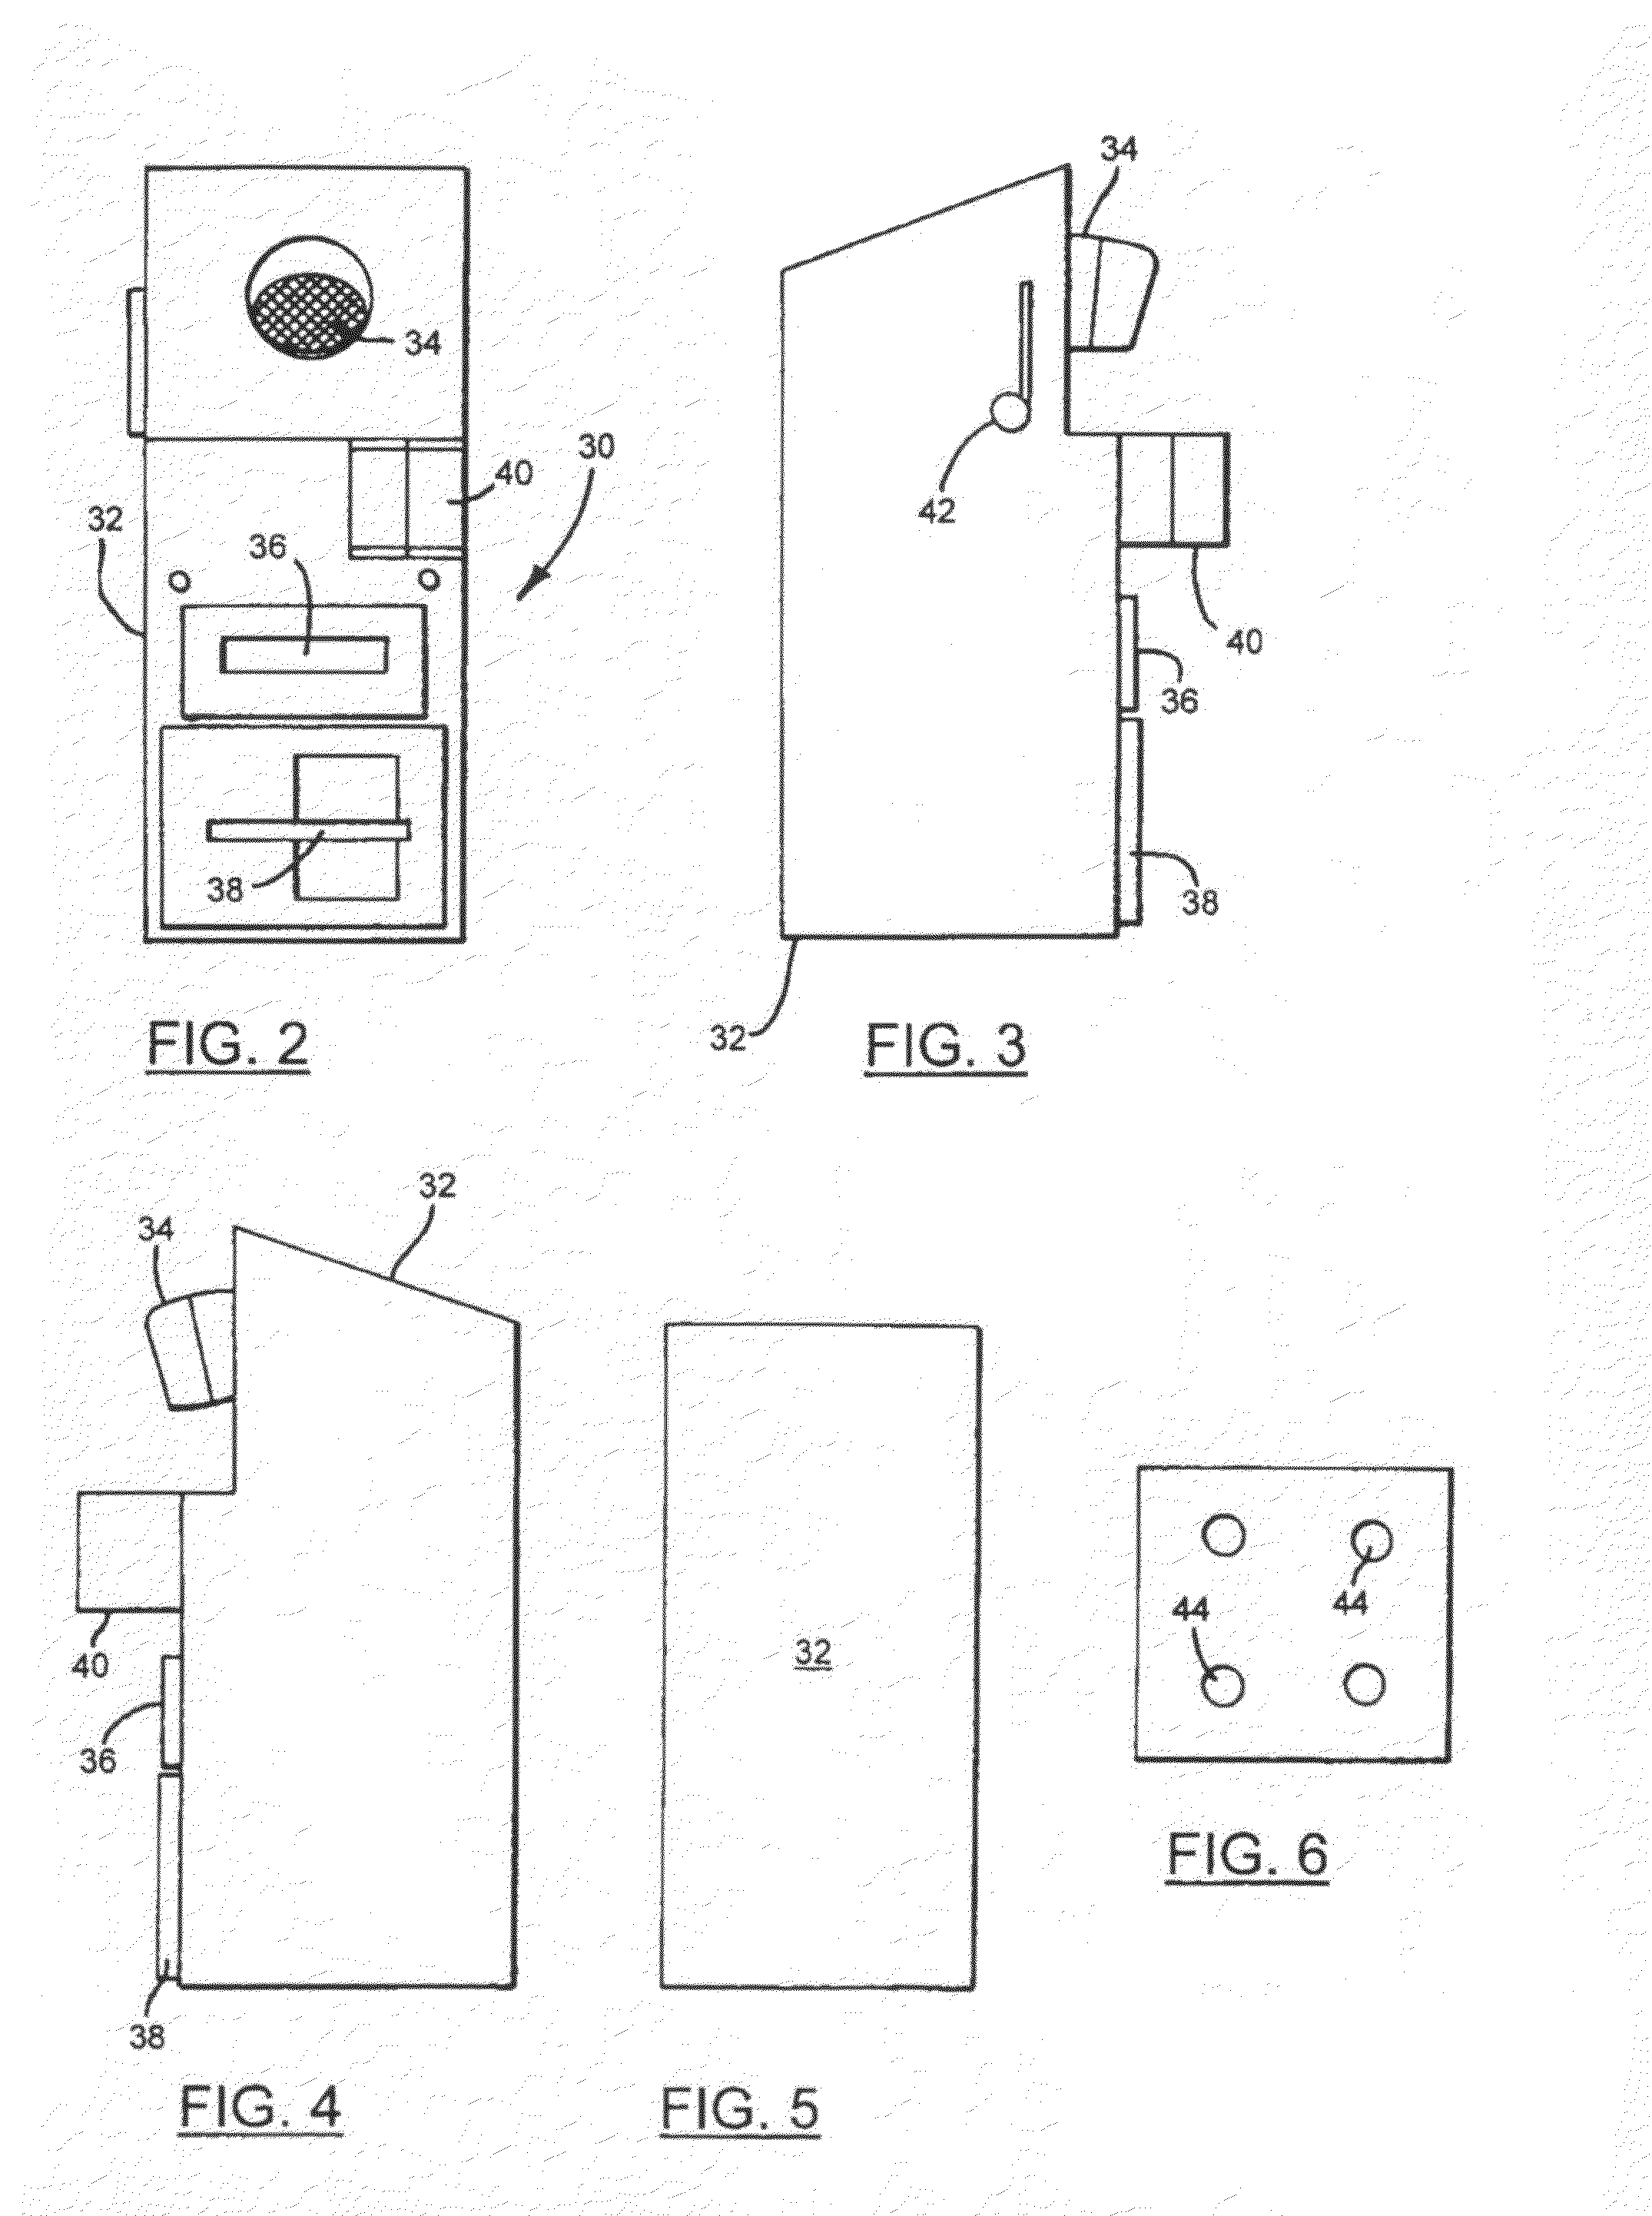 System and method for tracking inventory